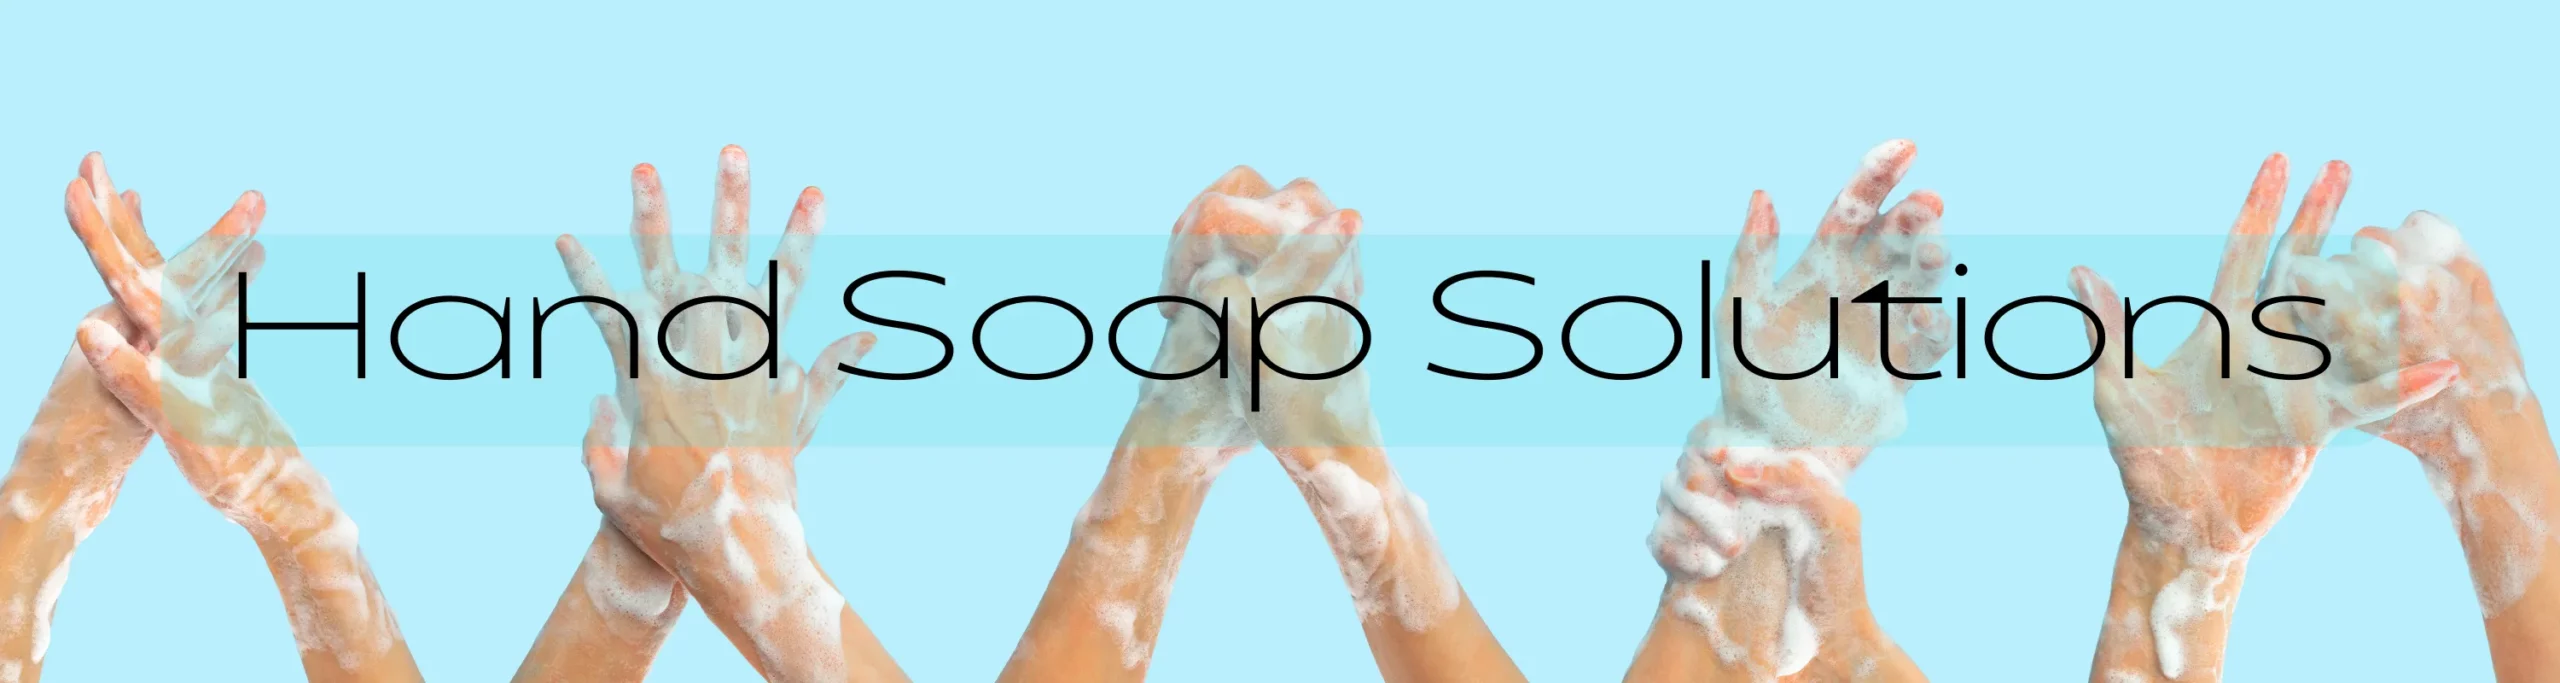 Hand Soap Solutions Banner